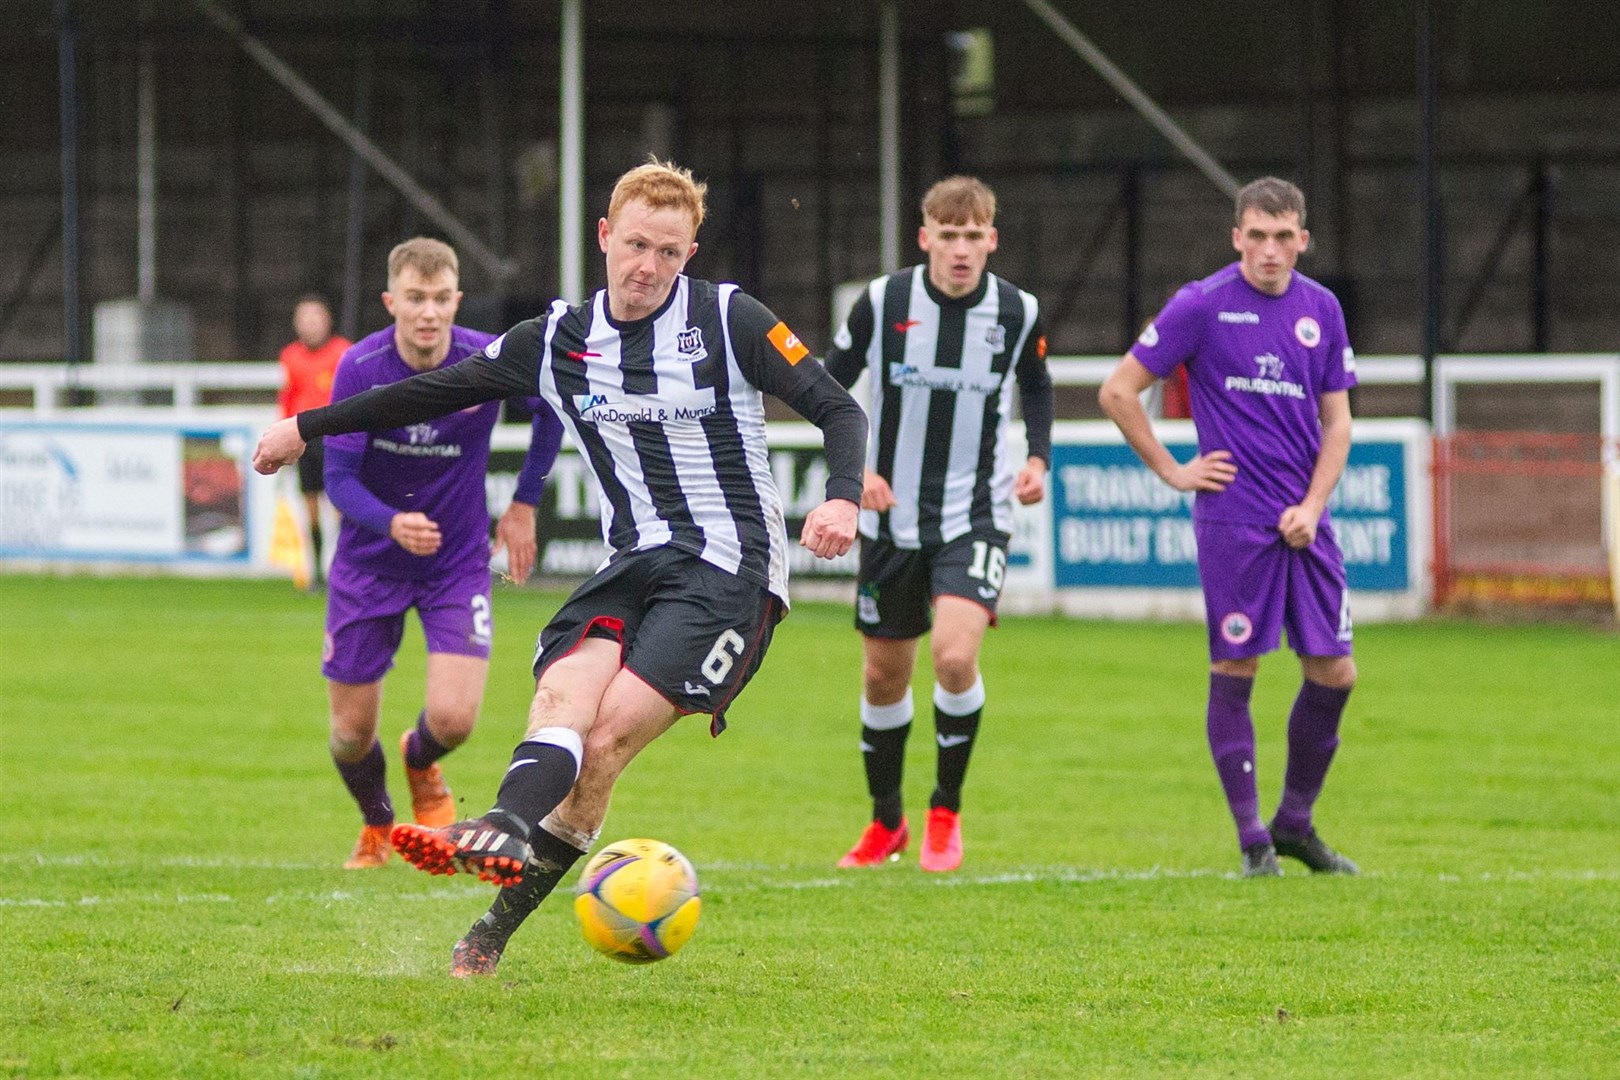 Russell Dingwall scored twice including a penalty in Elgin's opening day win at Stranraer. Photo: Daniel Forsyth.